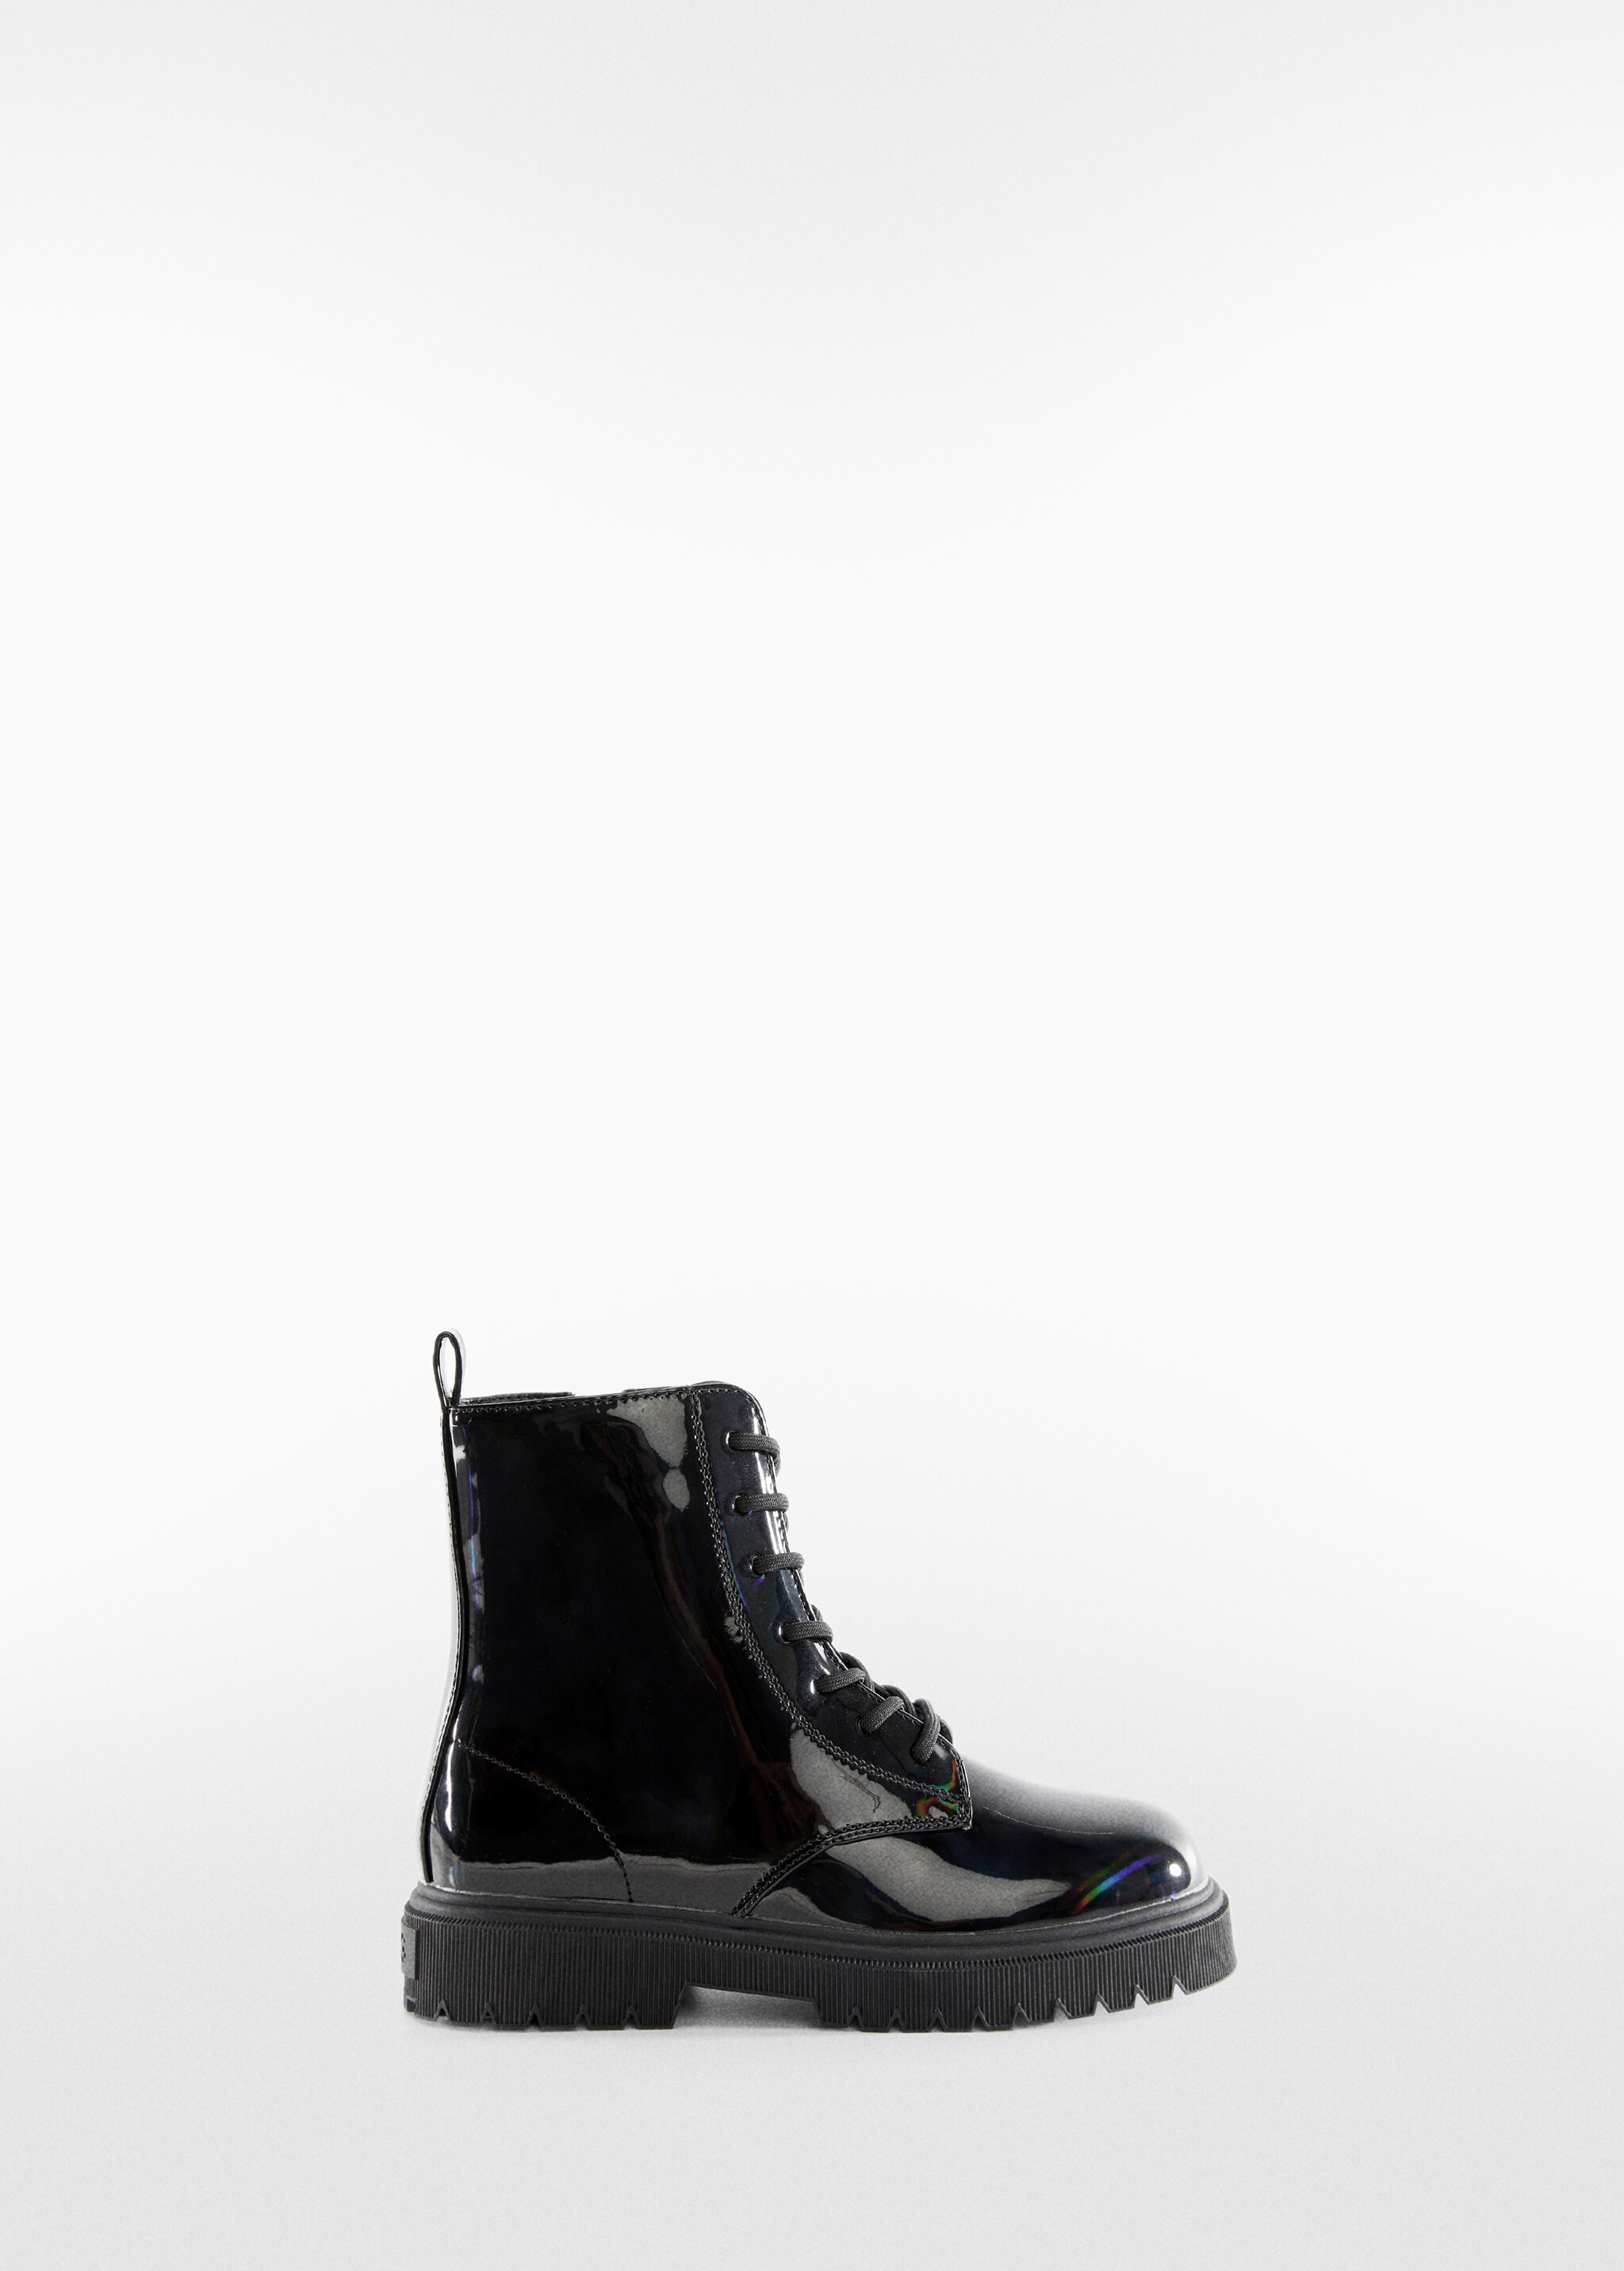 Lace-up patent effect boots - Article without model